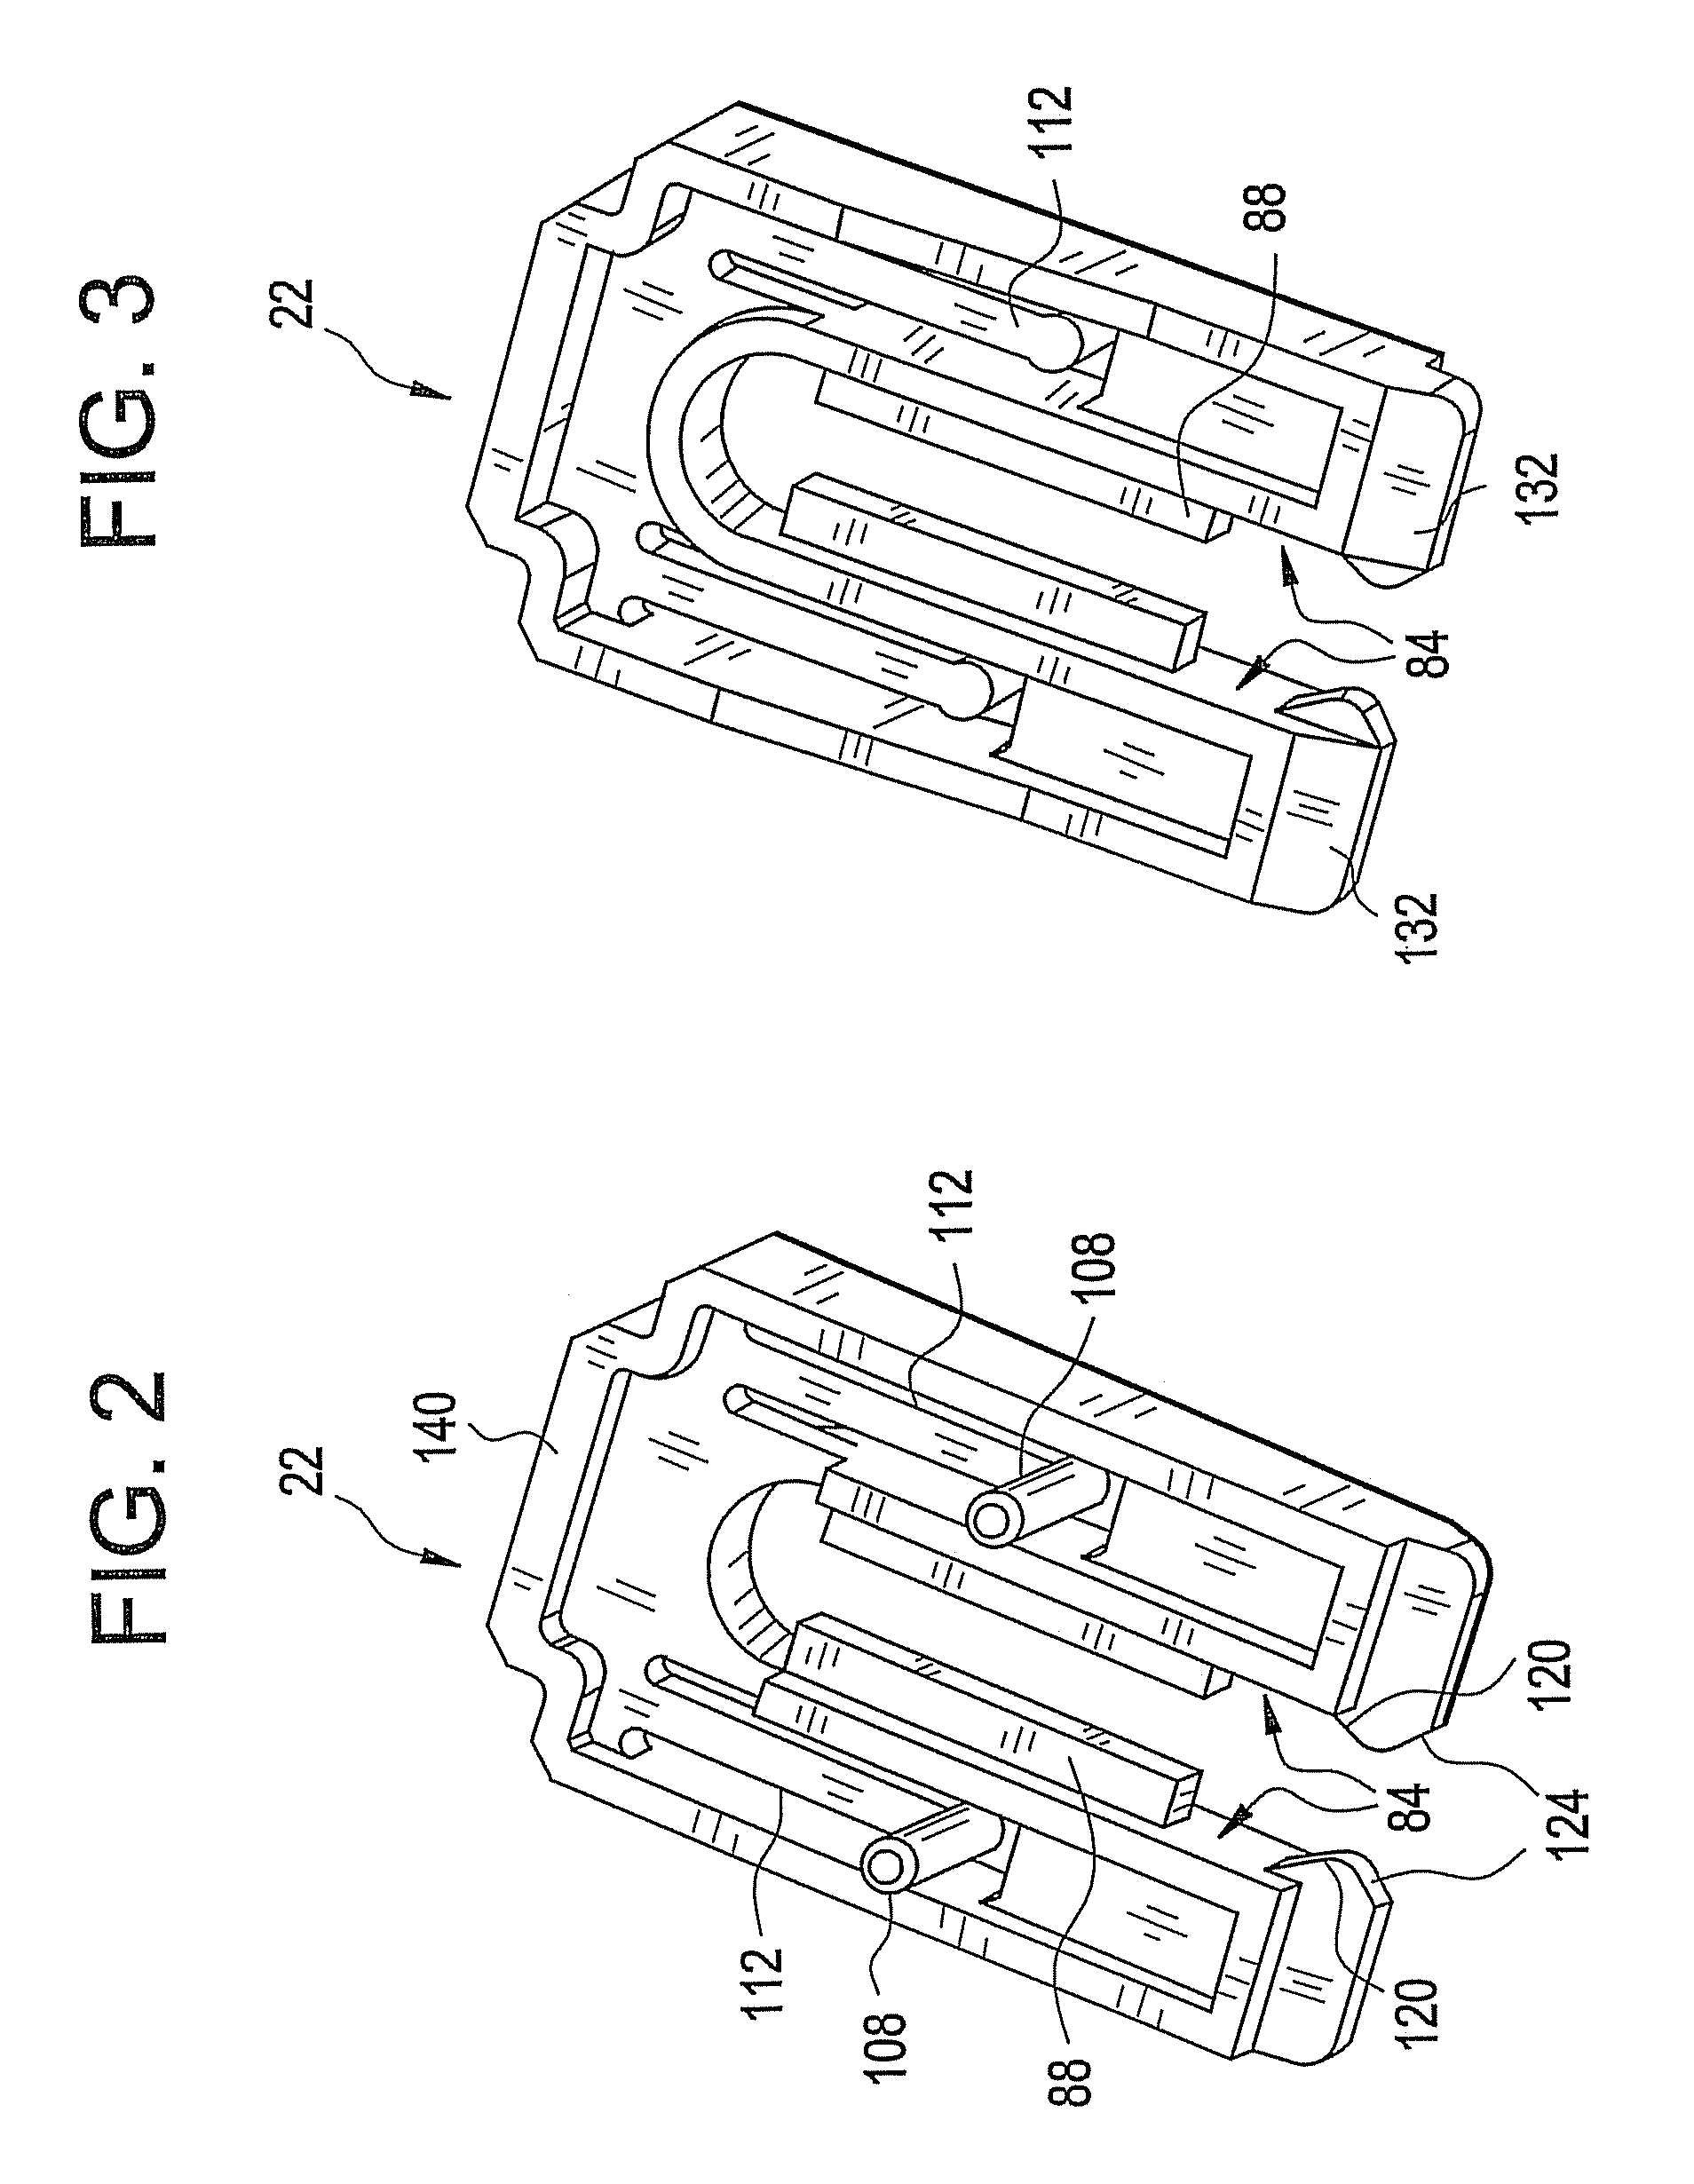 Enclosure-to-rail retaining system and method